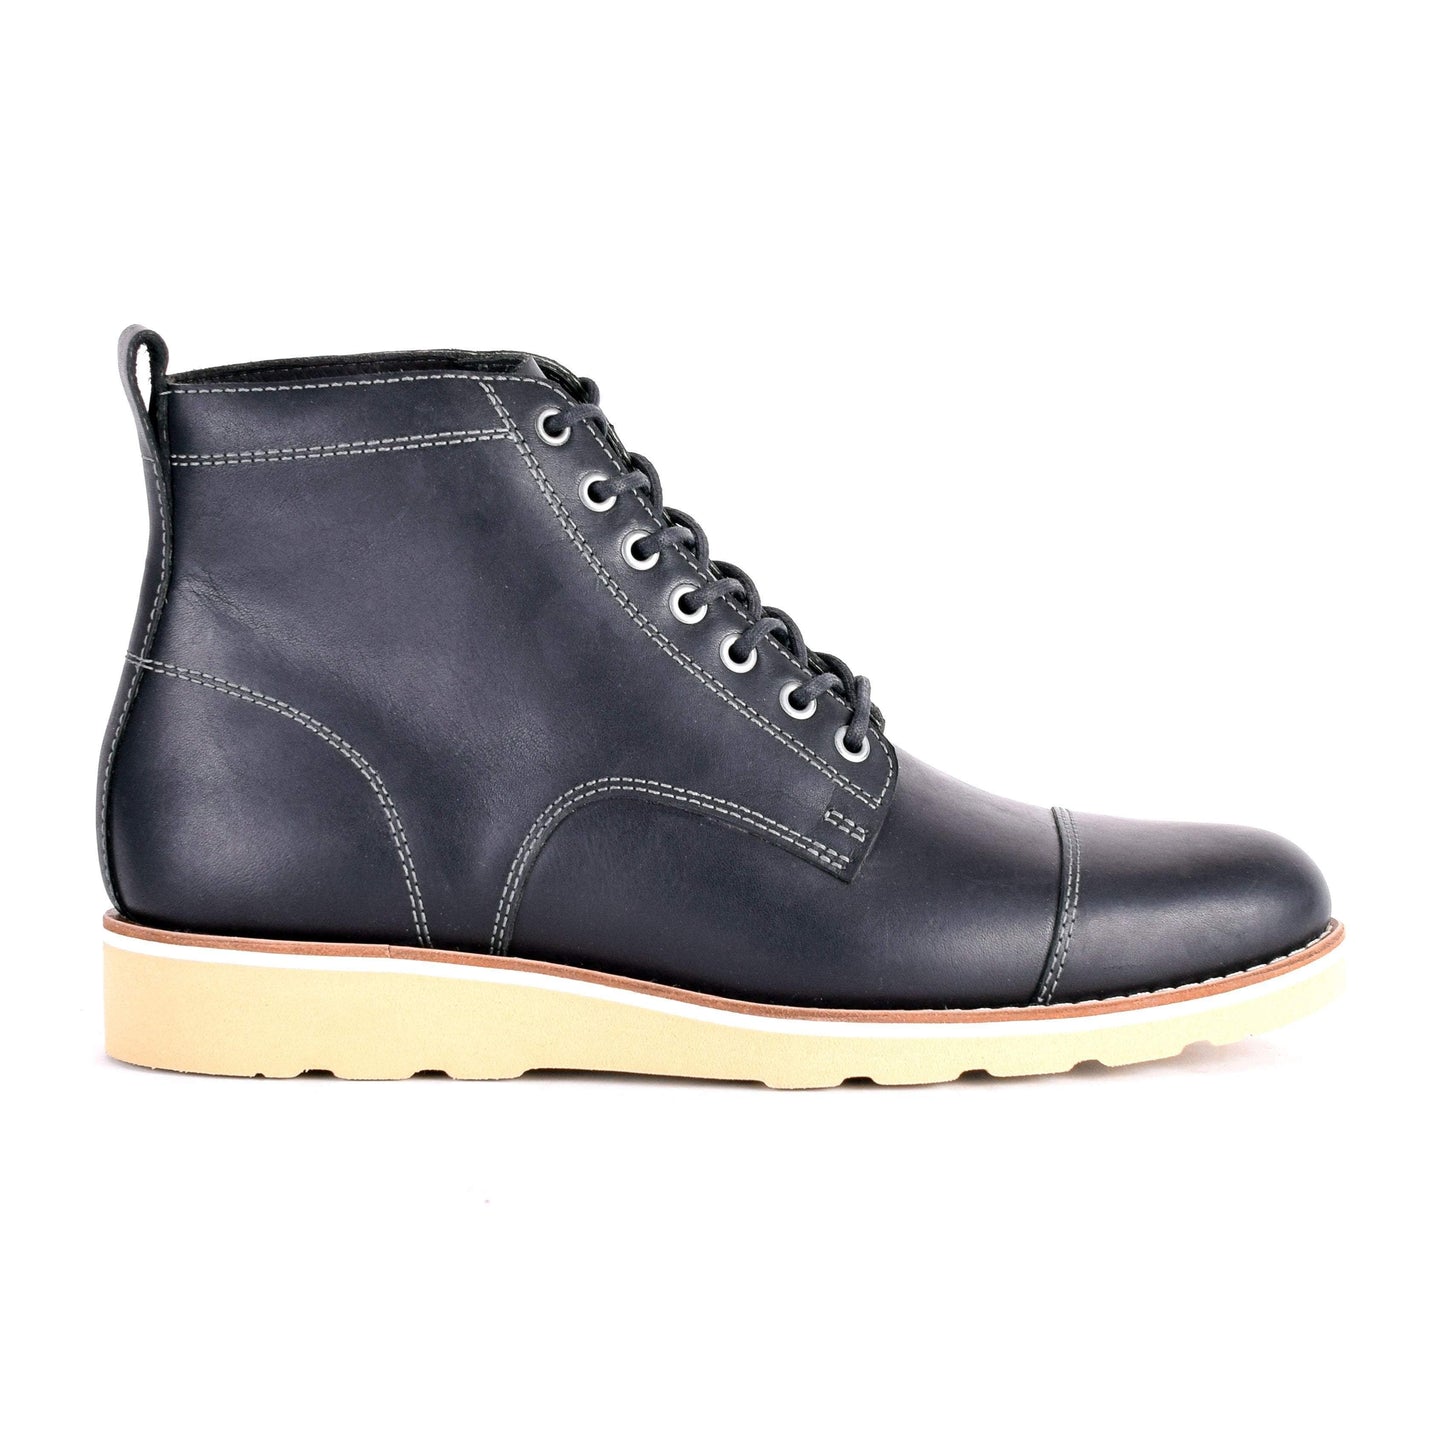 HELM Boots The Lou Black